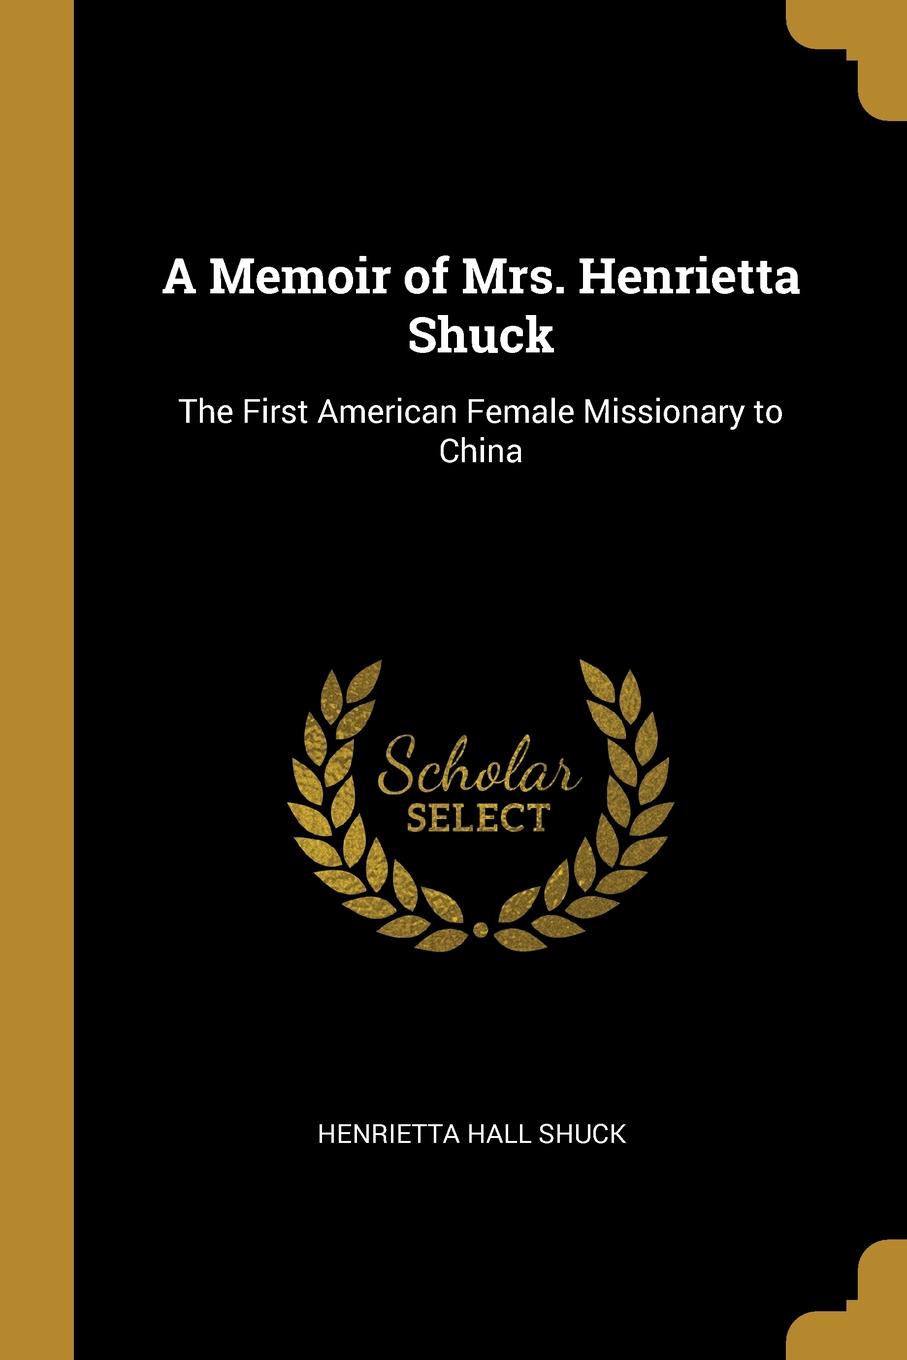 A Memoir of Mrs. Henrietta Shuck. The First American Female Missionary to China